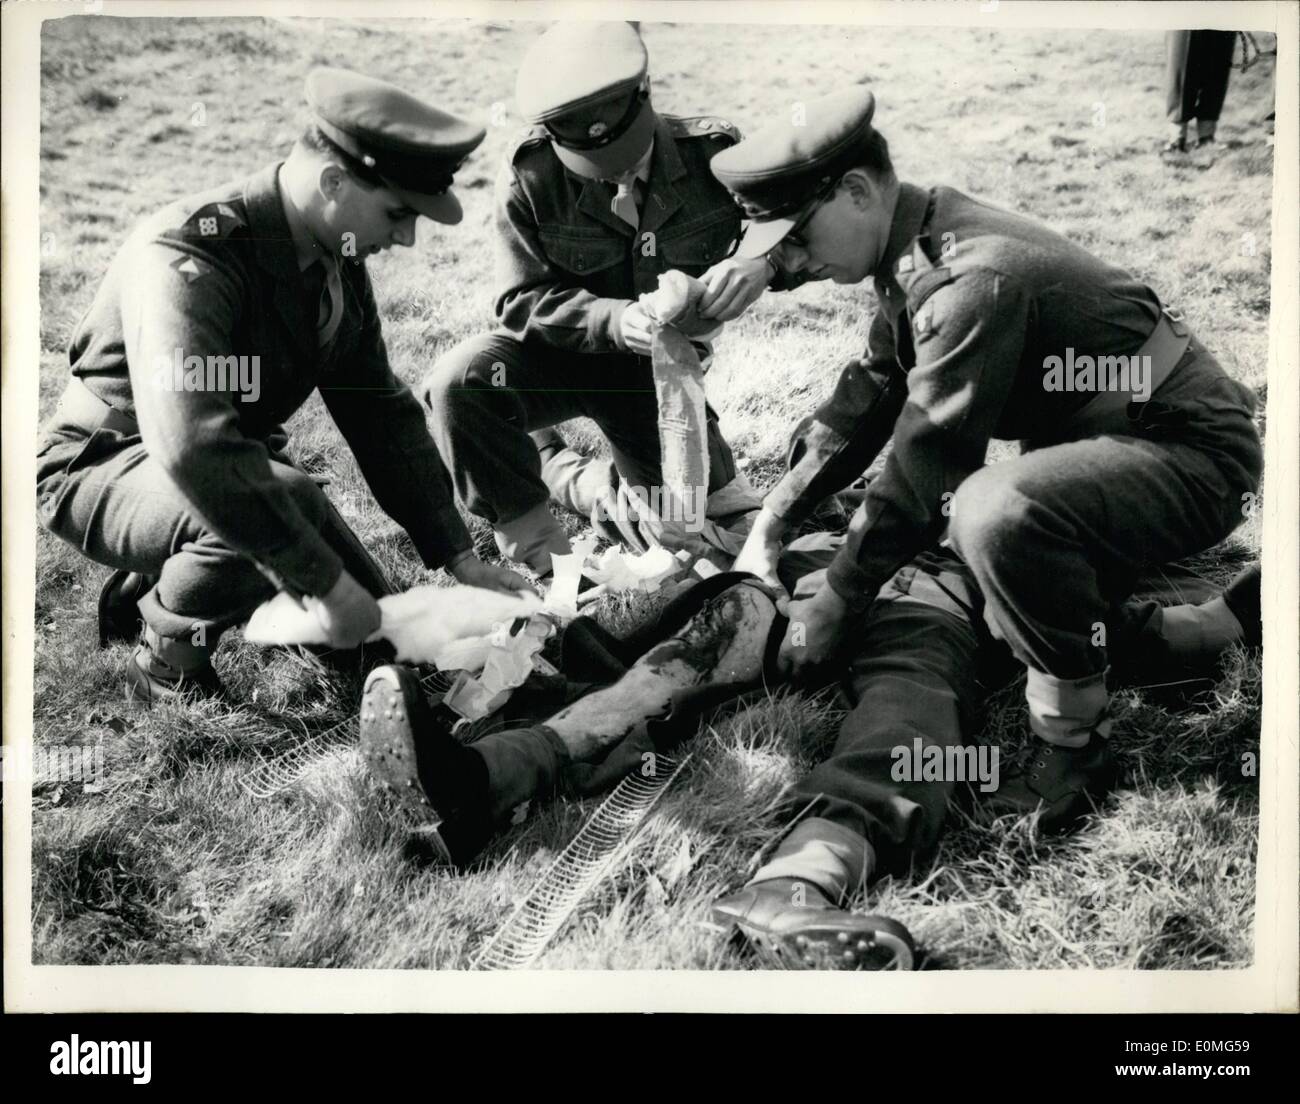 Apr. 04, 1955 - Army officers Recive first aid instruction Atomic Warfare: With the revolution in military strategy brought about by the development of atomic weapons, more and more army units are being trained in the first aid and rescue work - that has hitherto been the province of Civil Defence. The first of these special first aid courses for junior officers and senior N.C.O.s was held today at Ewshot camp, near Aldershot. On the completion of their course they will return to their units as instructors in first aid, with special reference to atomic warfare Stock Photo